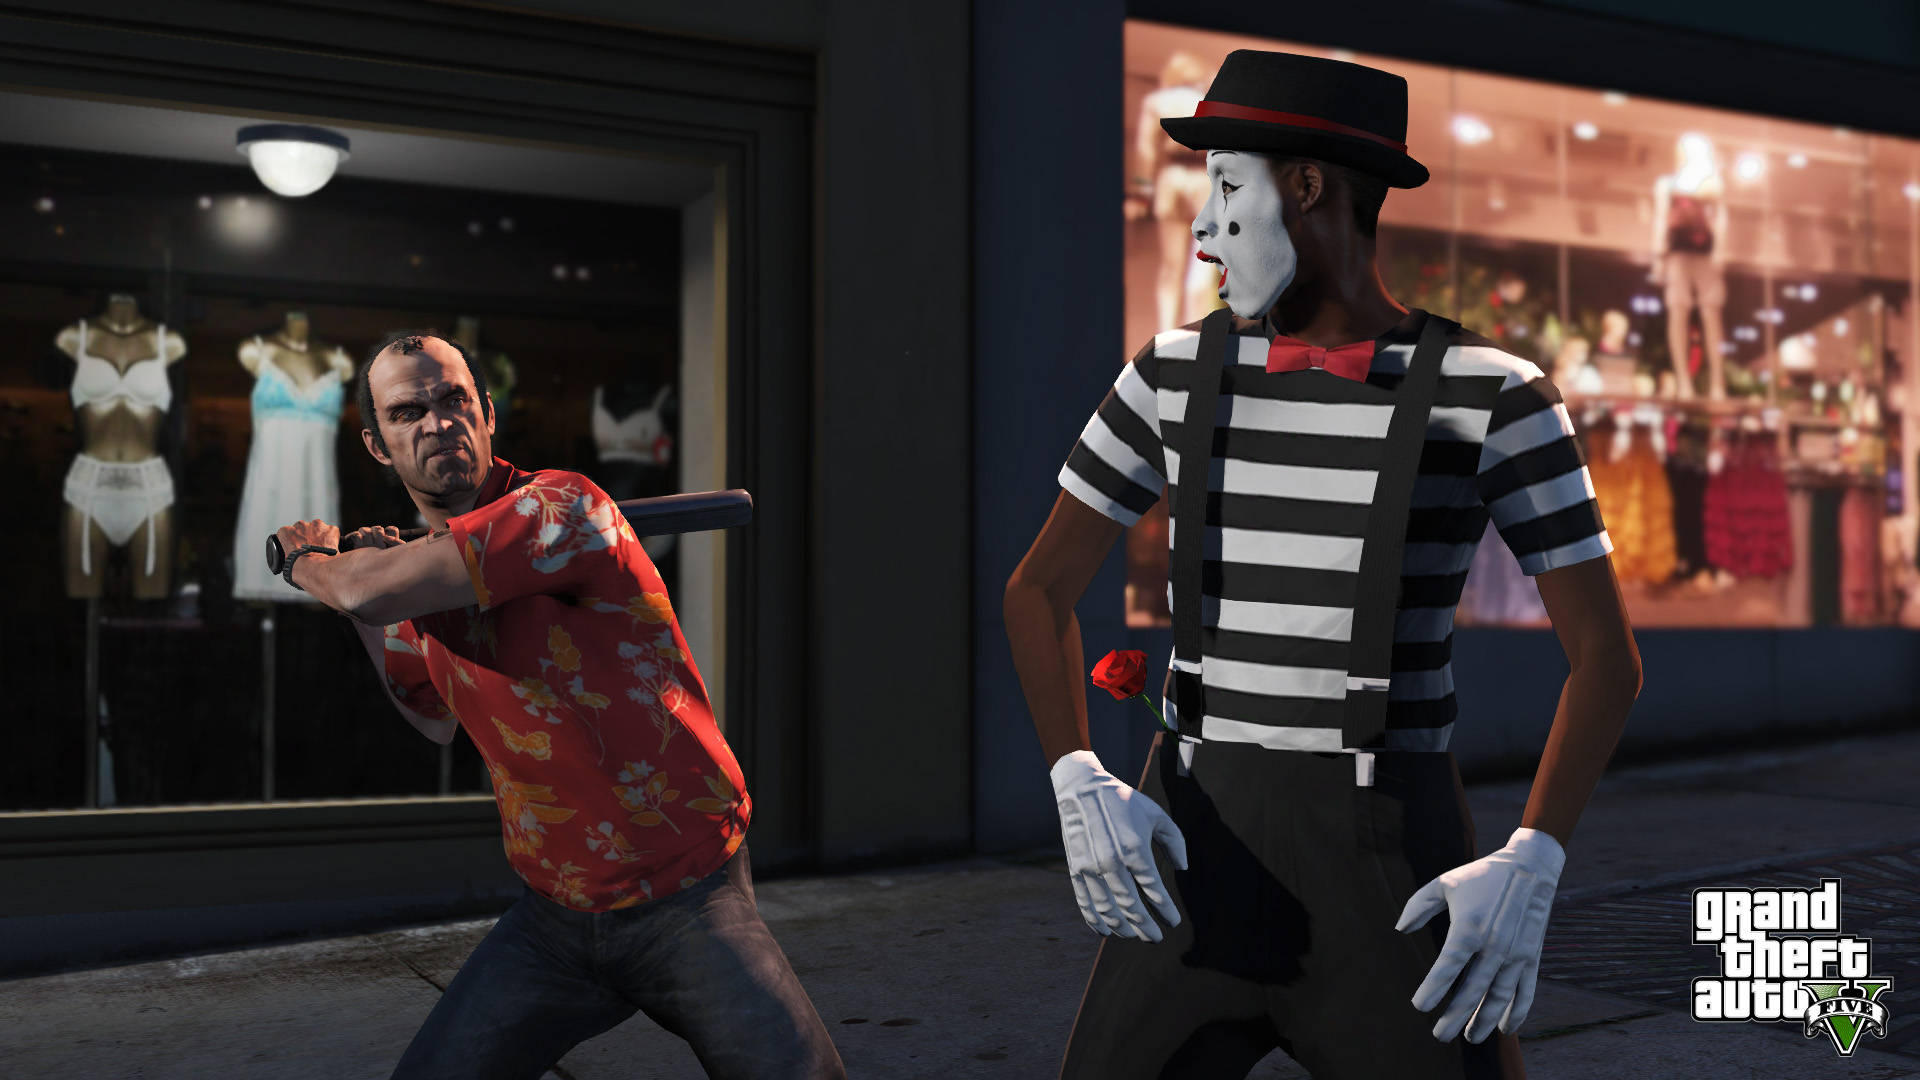 Trevor's Furious Attack On Mime In Stunning 4k Gta 5 Gaming Landscape